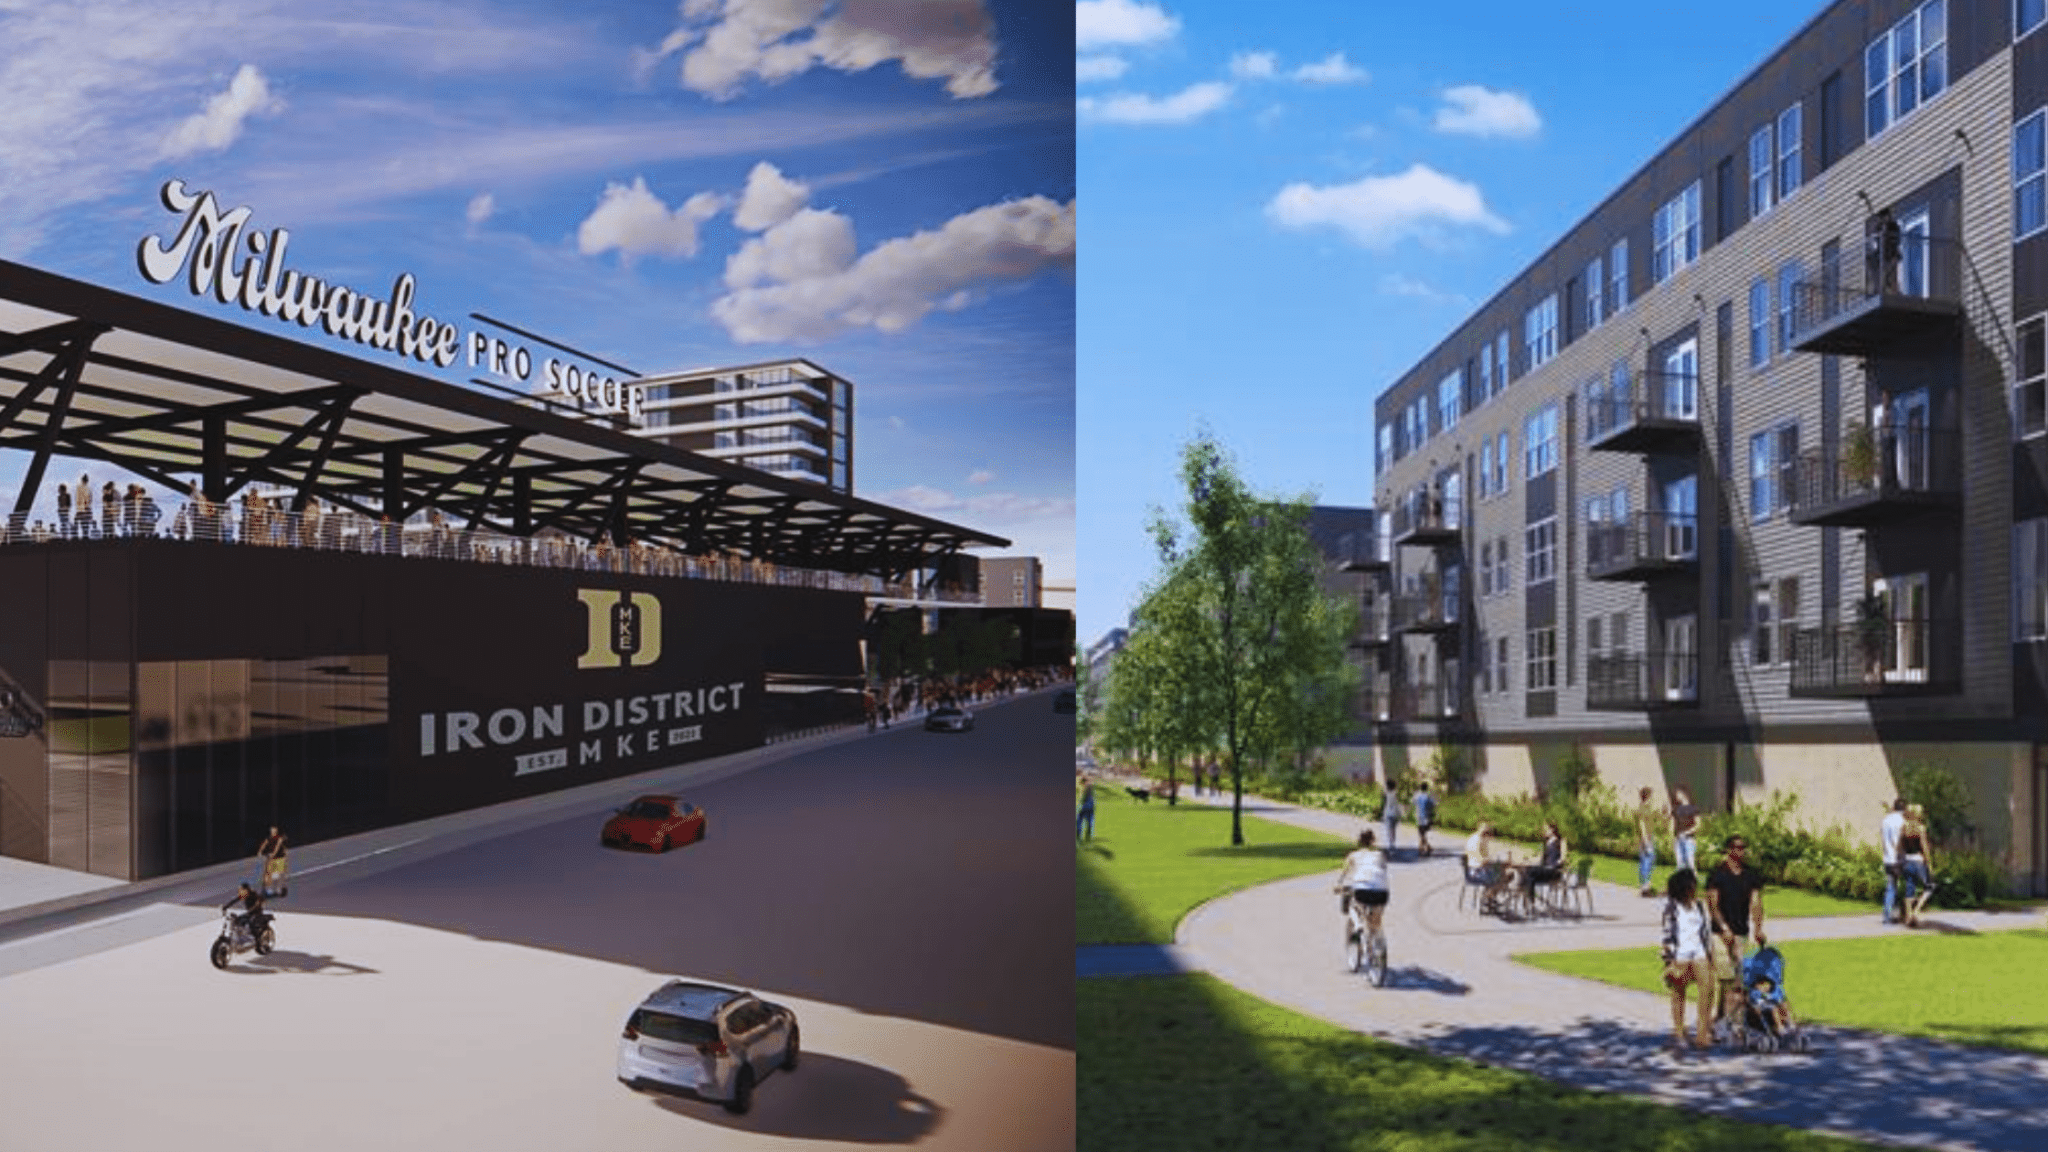 Filer & Stowell redevelopment and Iron District MKE - Bear Real Estate Groups projects in Milwaukee